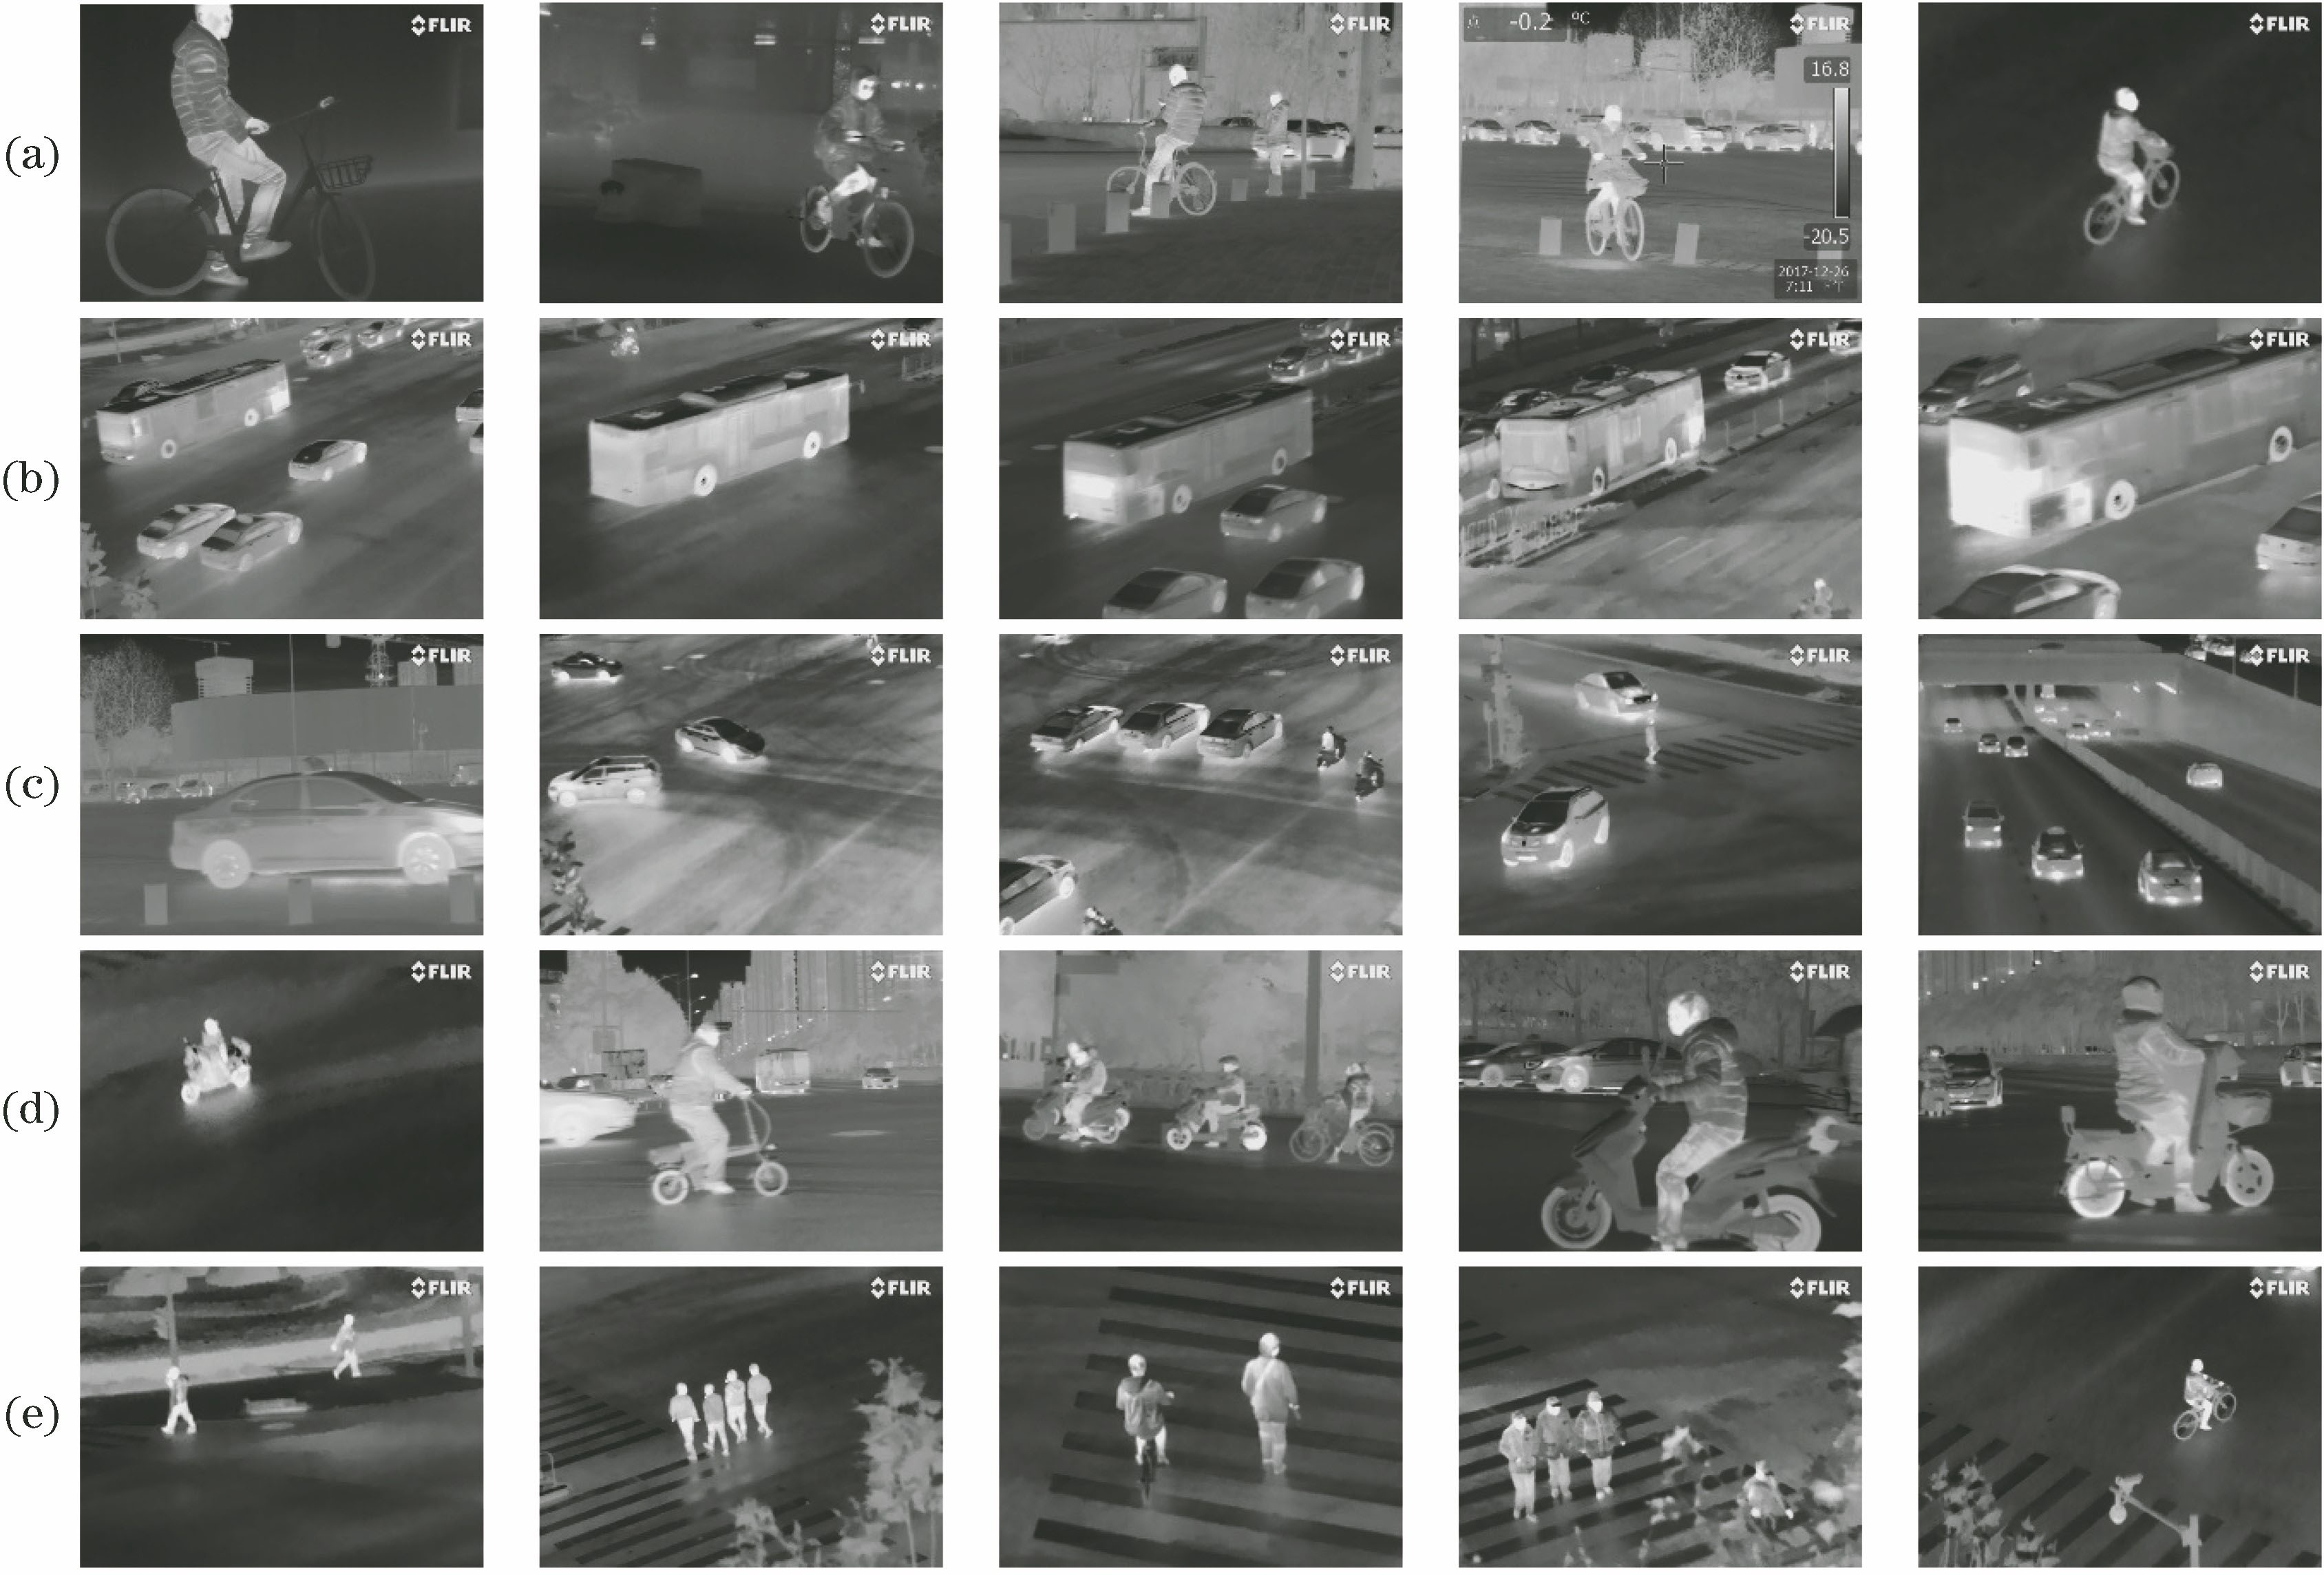 Infrared images dataset (examples). (a) Bicycle; (b) bus; (c) car; (d) motorbike; (e) pedestrian